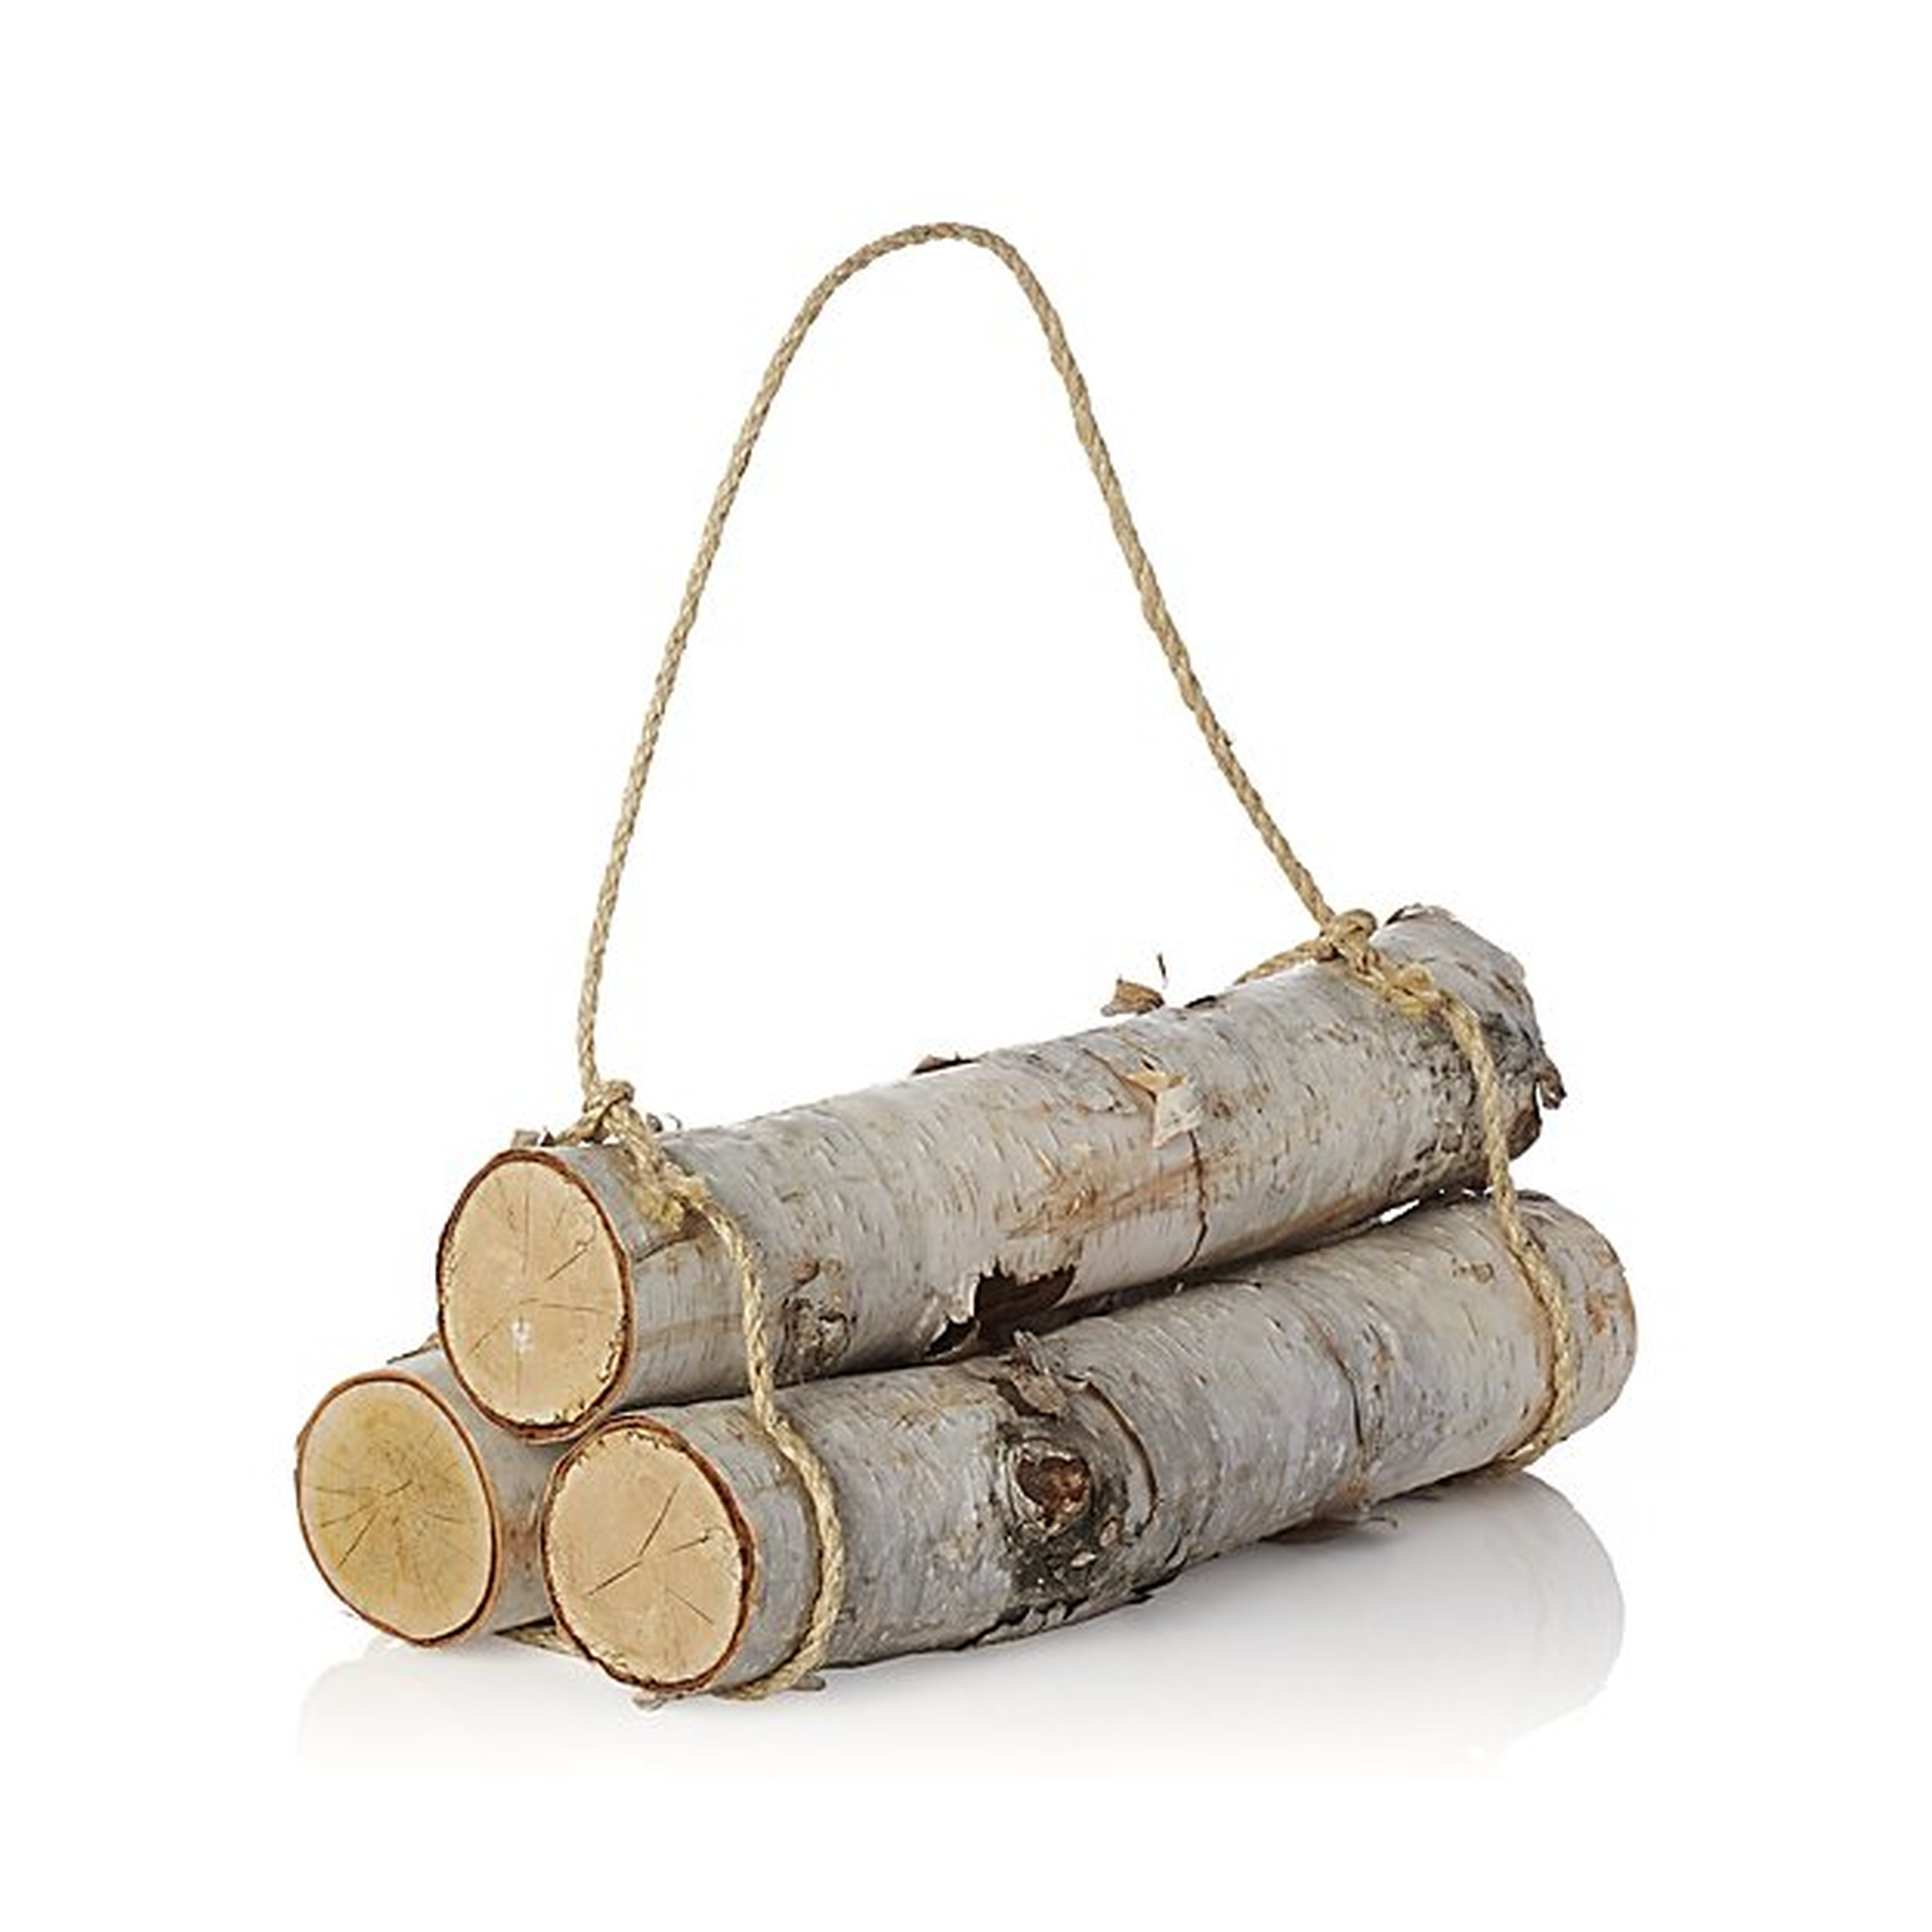 Set of 3 Birch Logs - Crate and Barrel